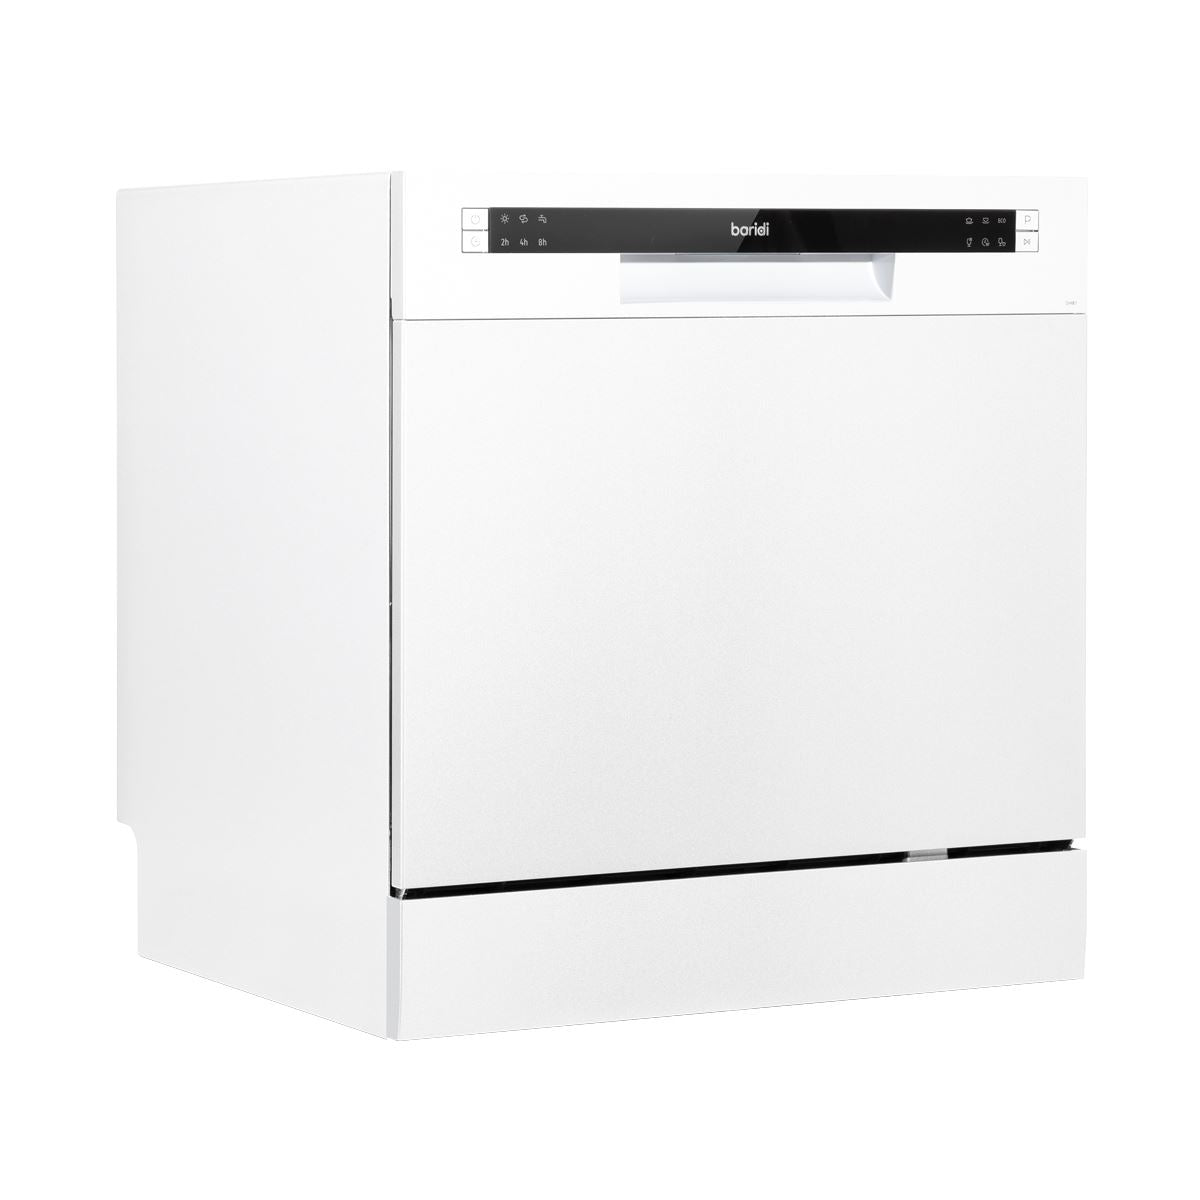 Baridi Compact Tabletop Dishwasher 8 Place Settings, 6 Programmes, Low Noise, 8L Cycle, Start Delay - White